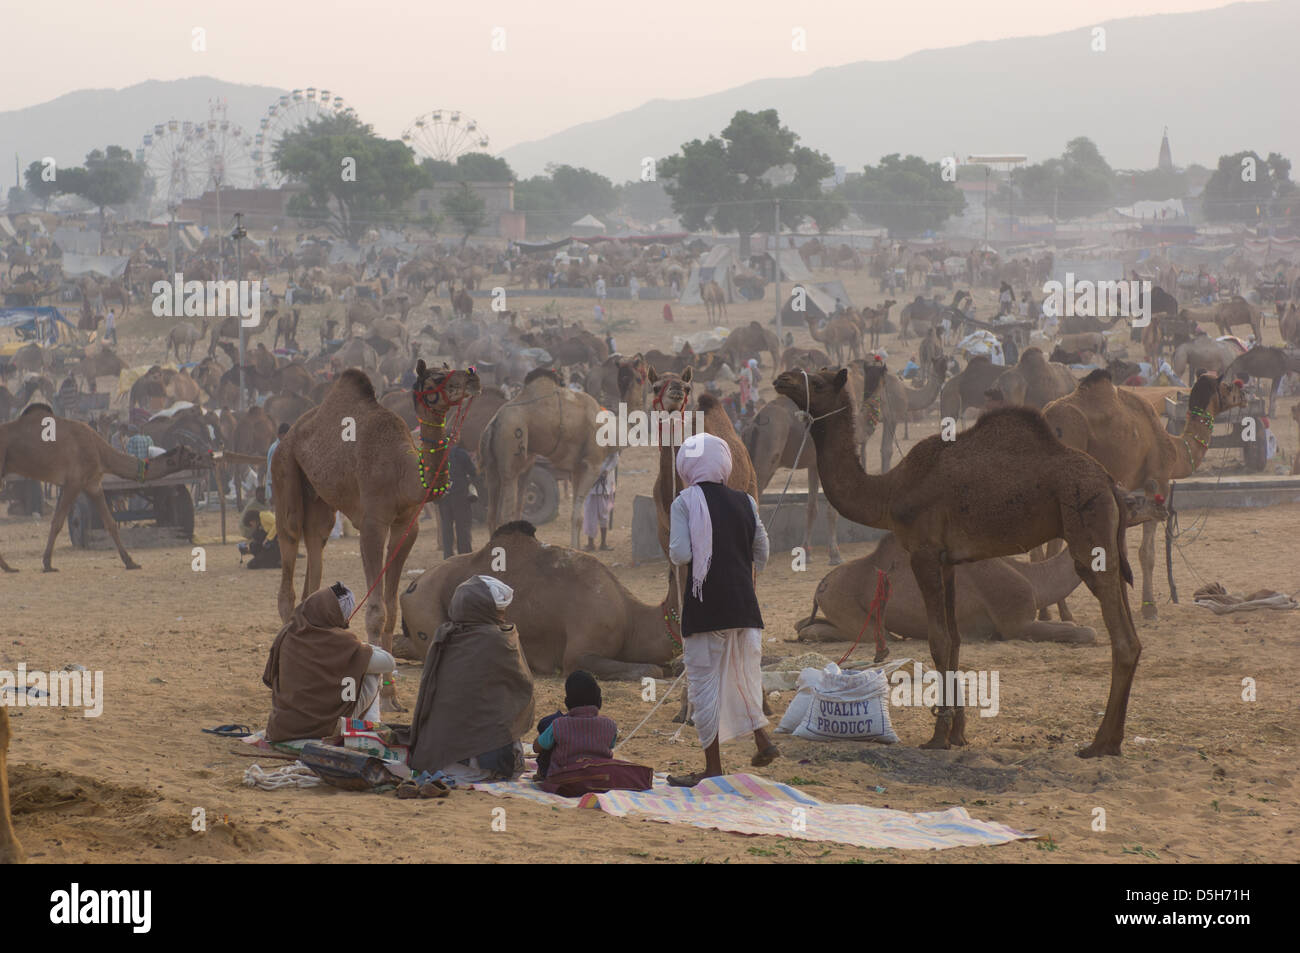 Rajasthani men  camped in front of a sea of camels in the desert with the ferris wheels of the fairground behind,  Pushlar Mela, Pushkar, Rajasthan, India Stock Photo